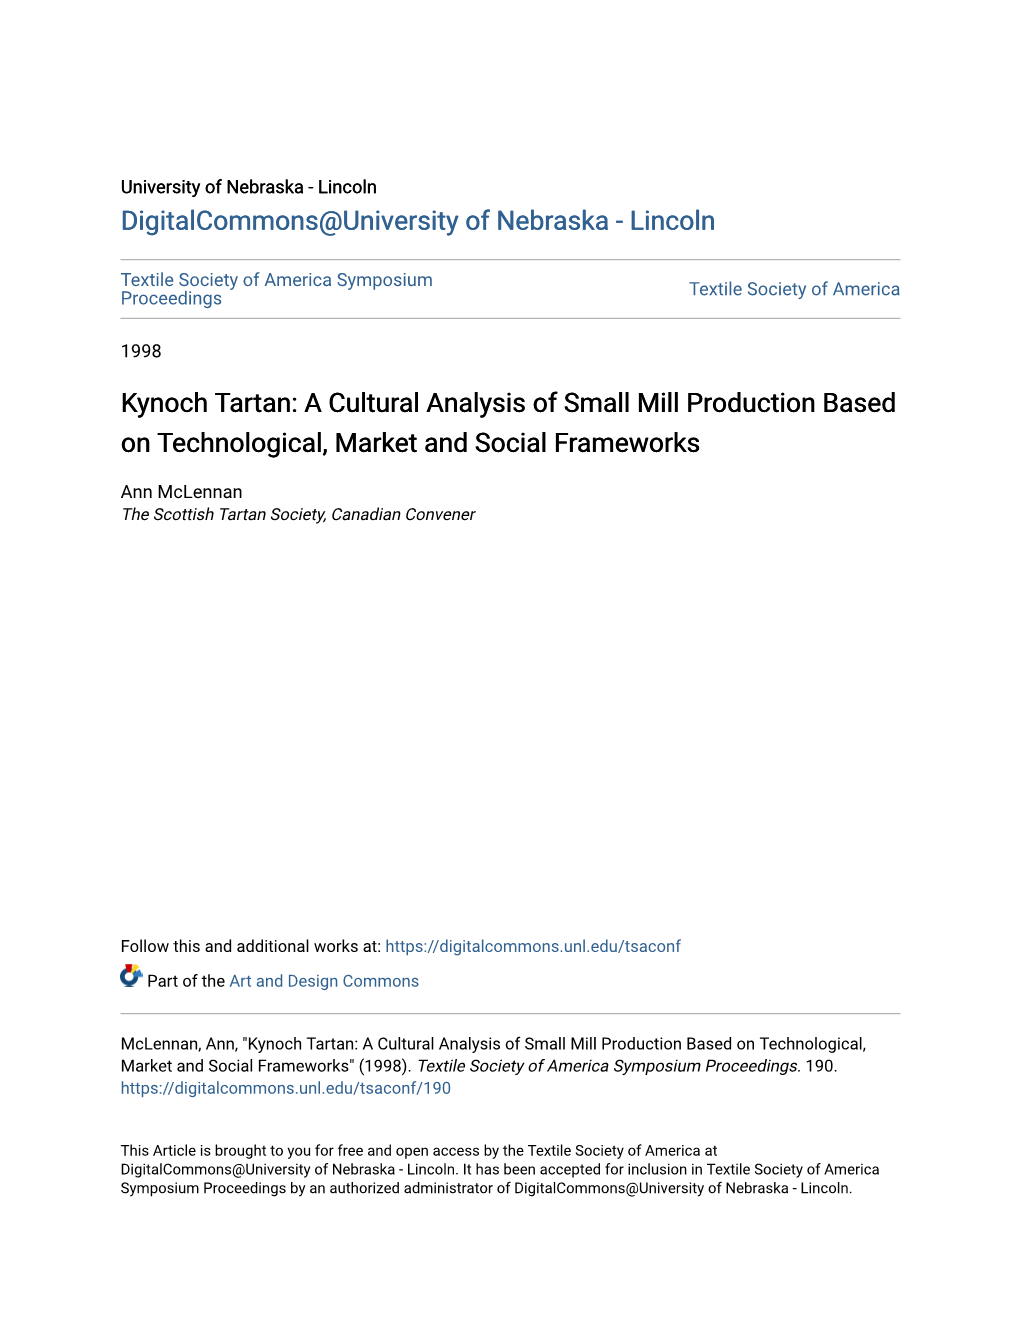 Kynoch Tartan: a Cultural Analysis of Small Mill Production Based on Technological, Market and Social Frameworks